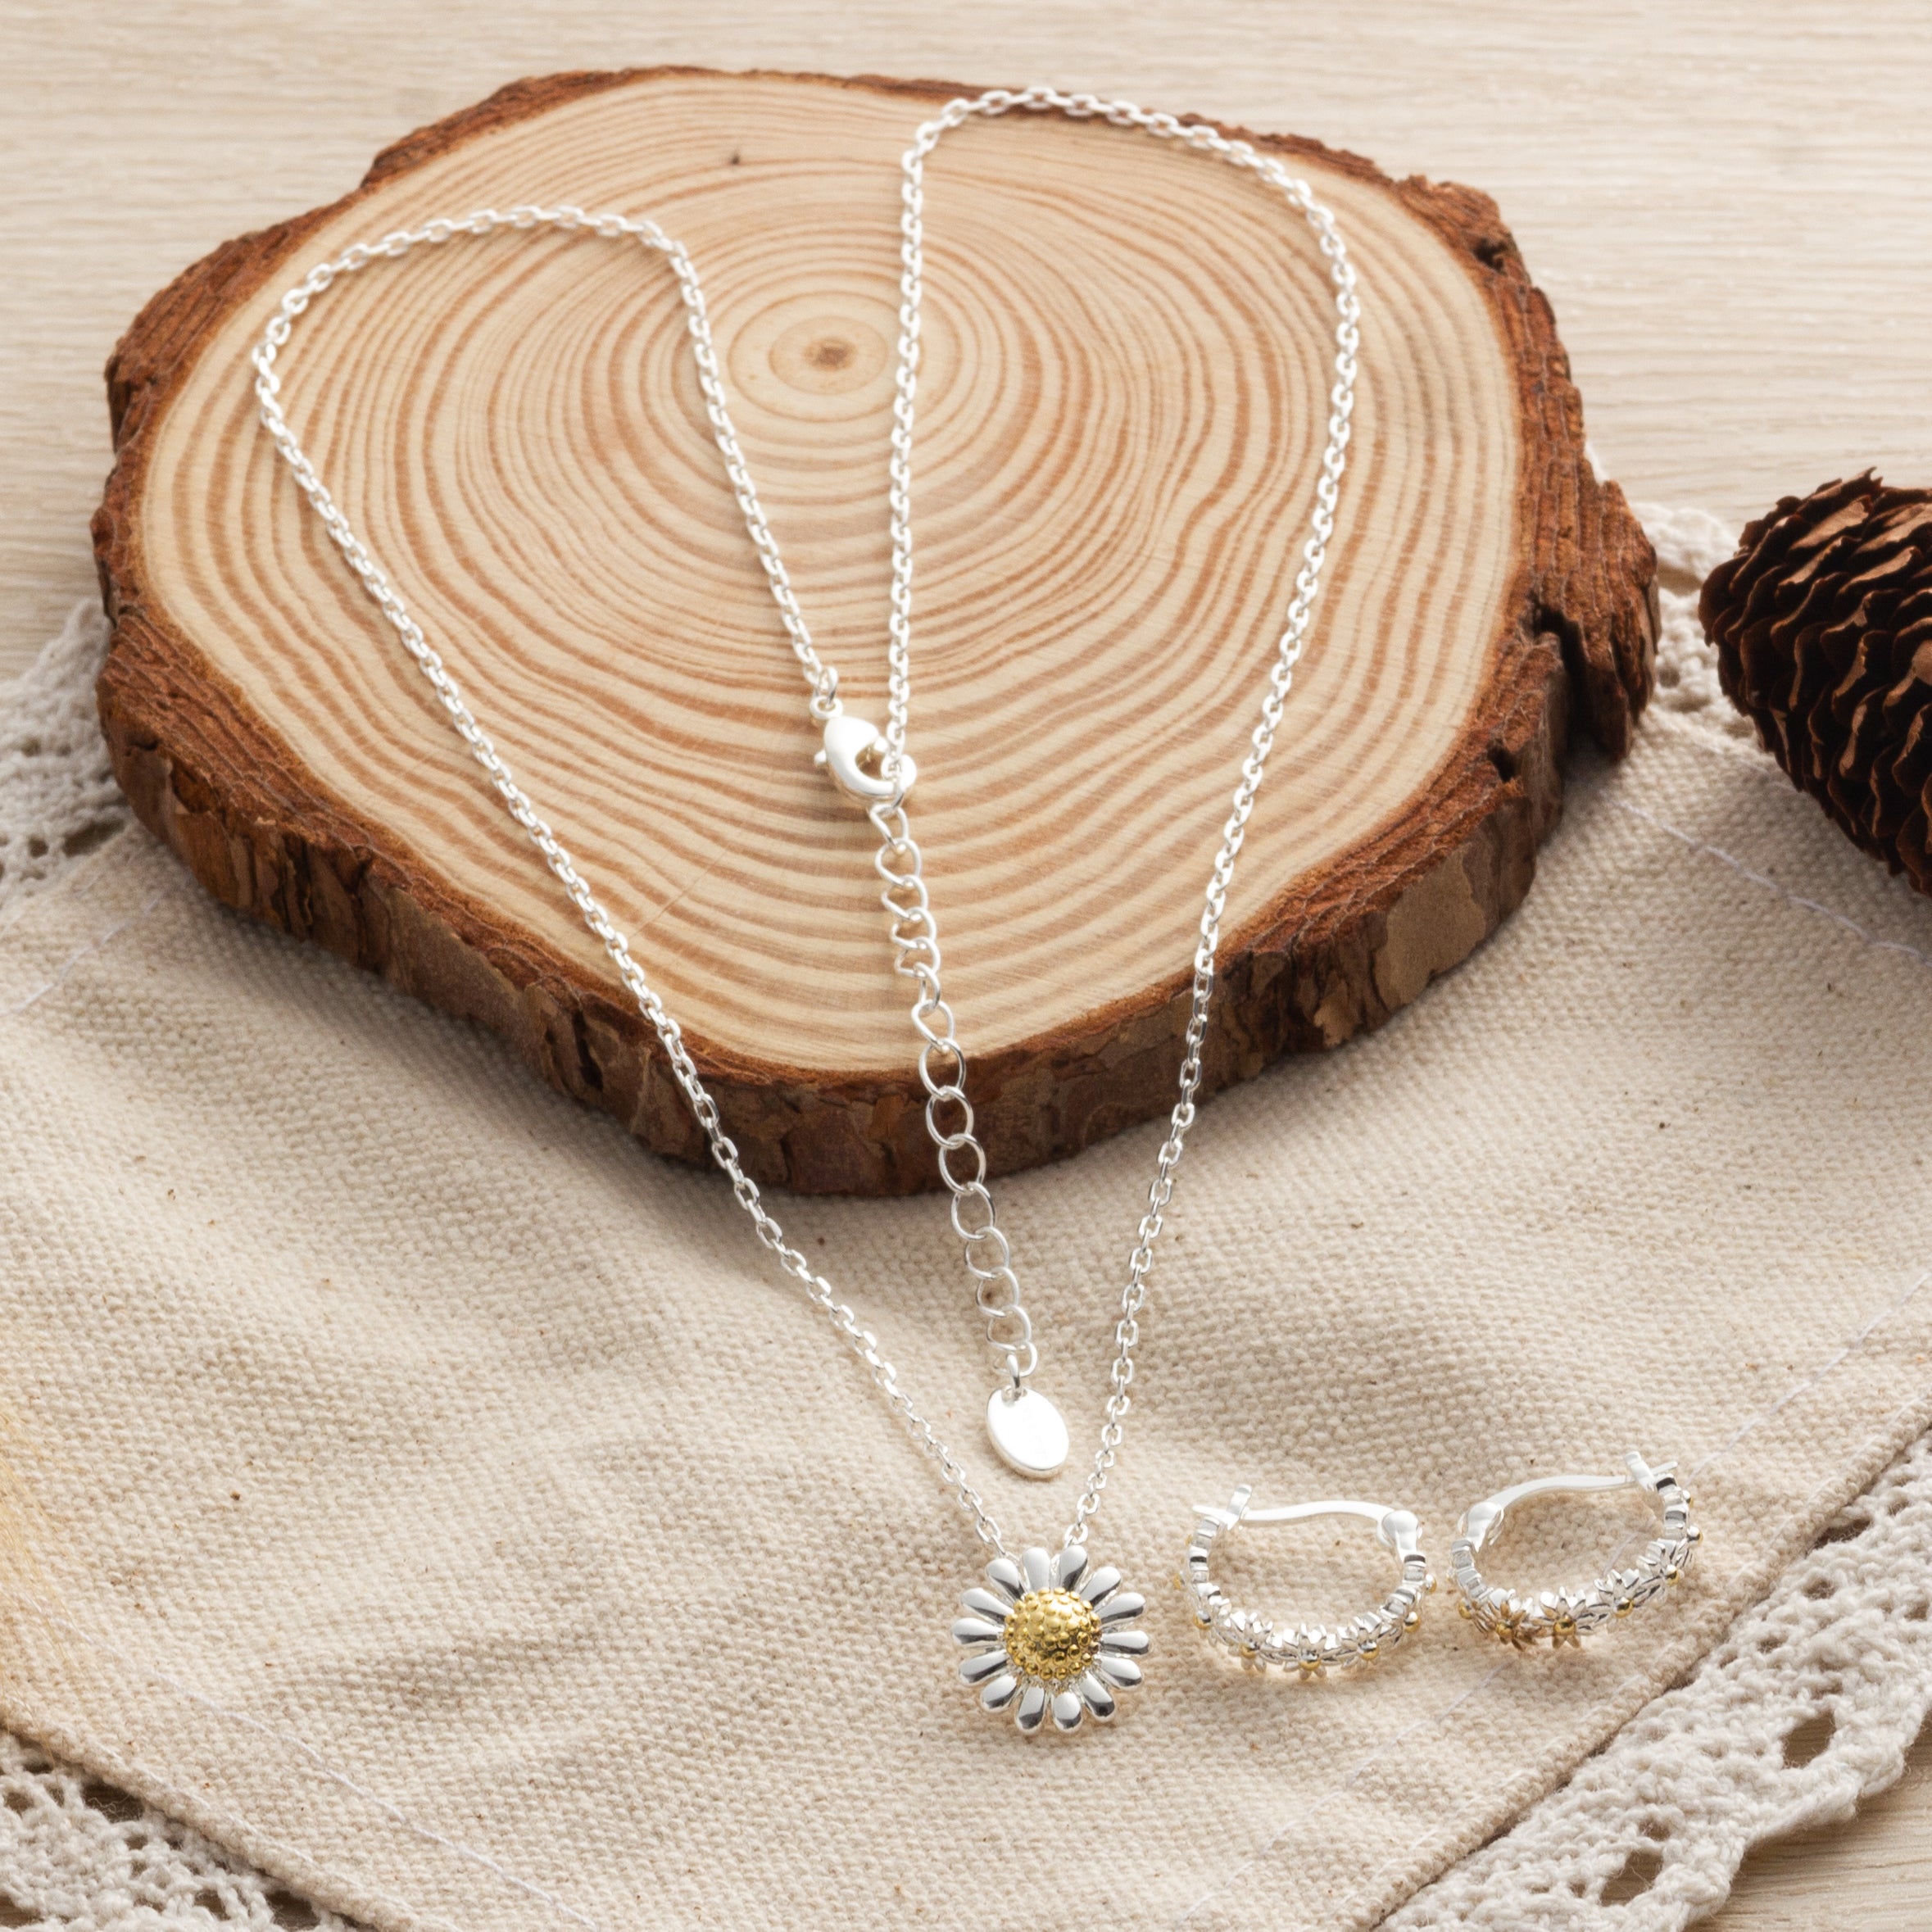 Daisy Necklace and Hoop Earrings Set